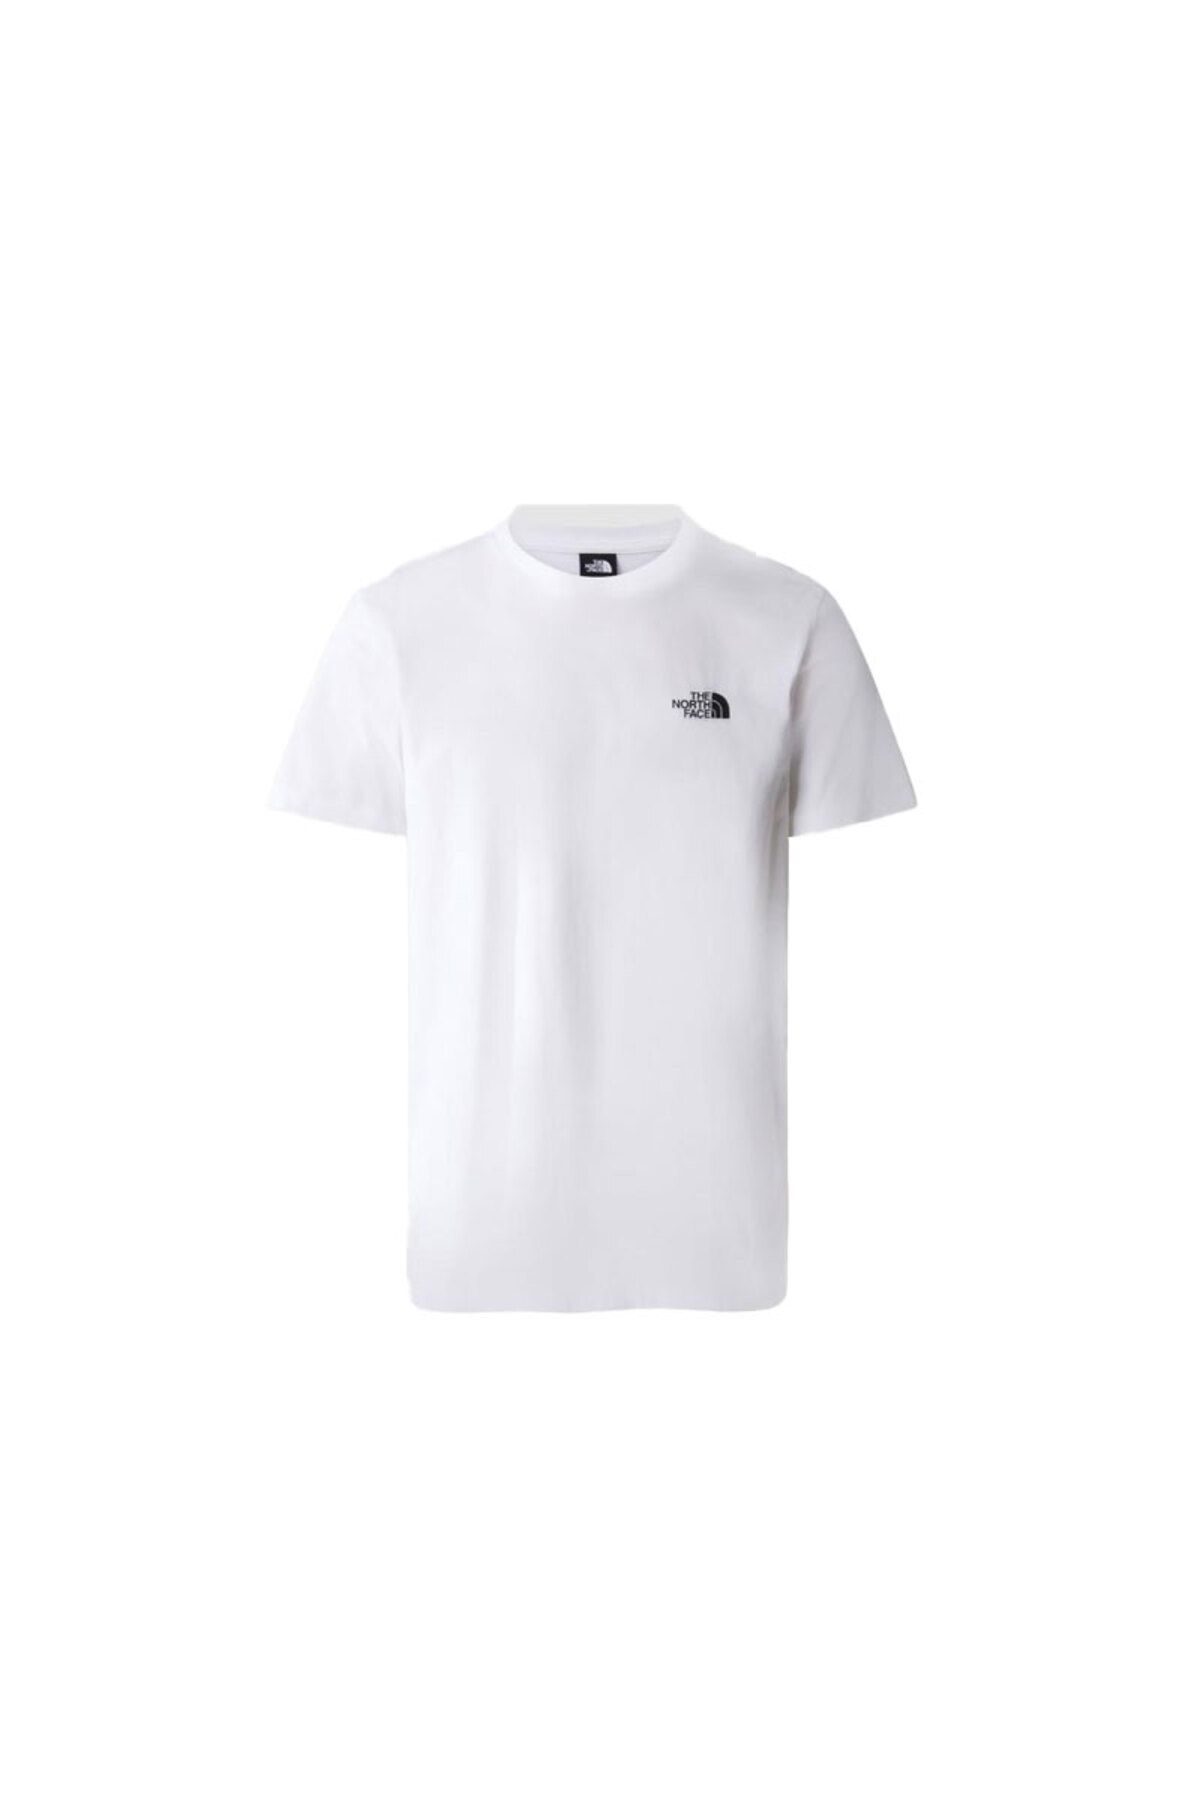 The North Face M S/S Sımple Dome T-Shirt